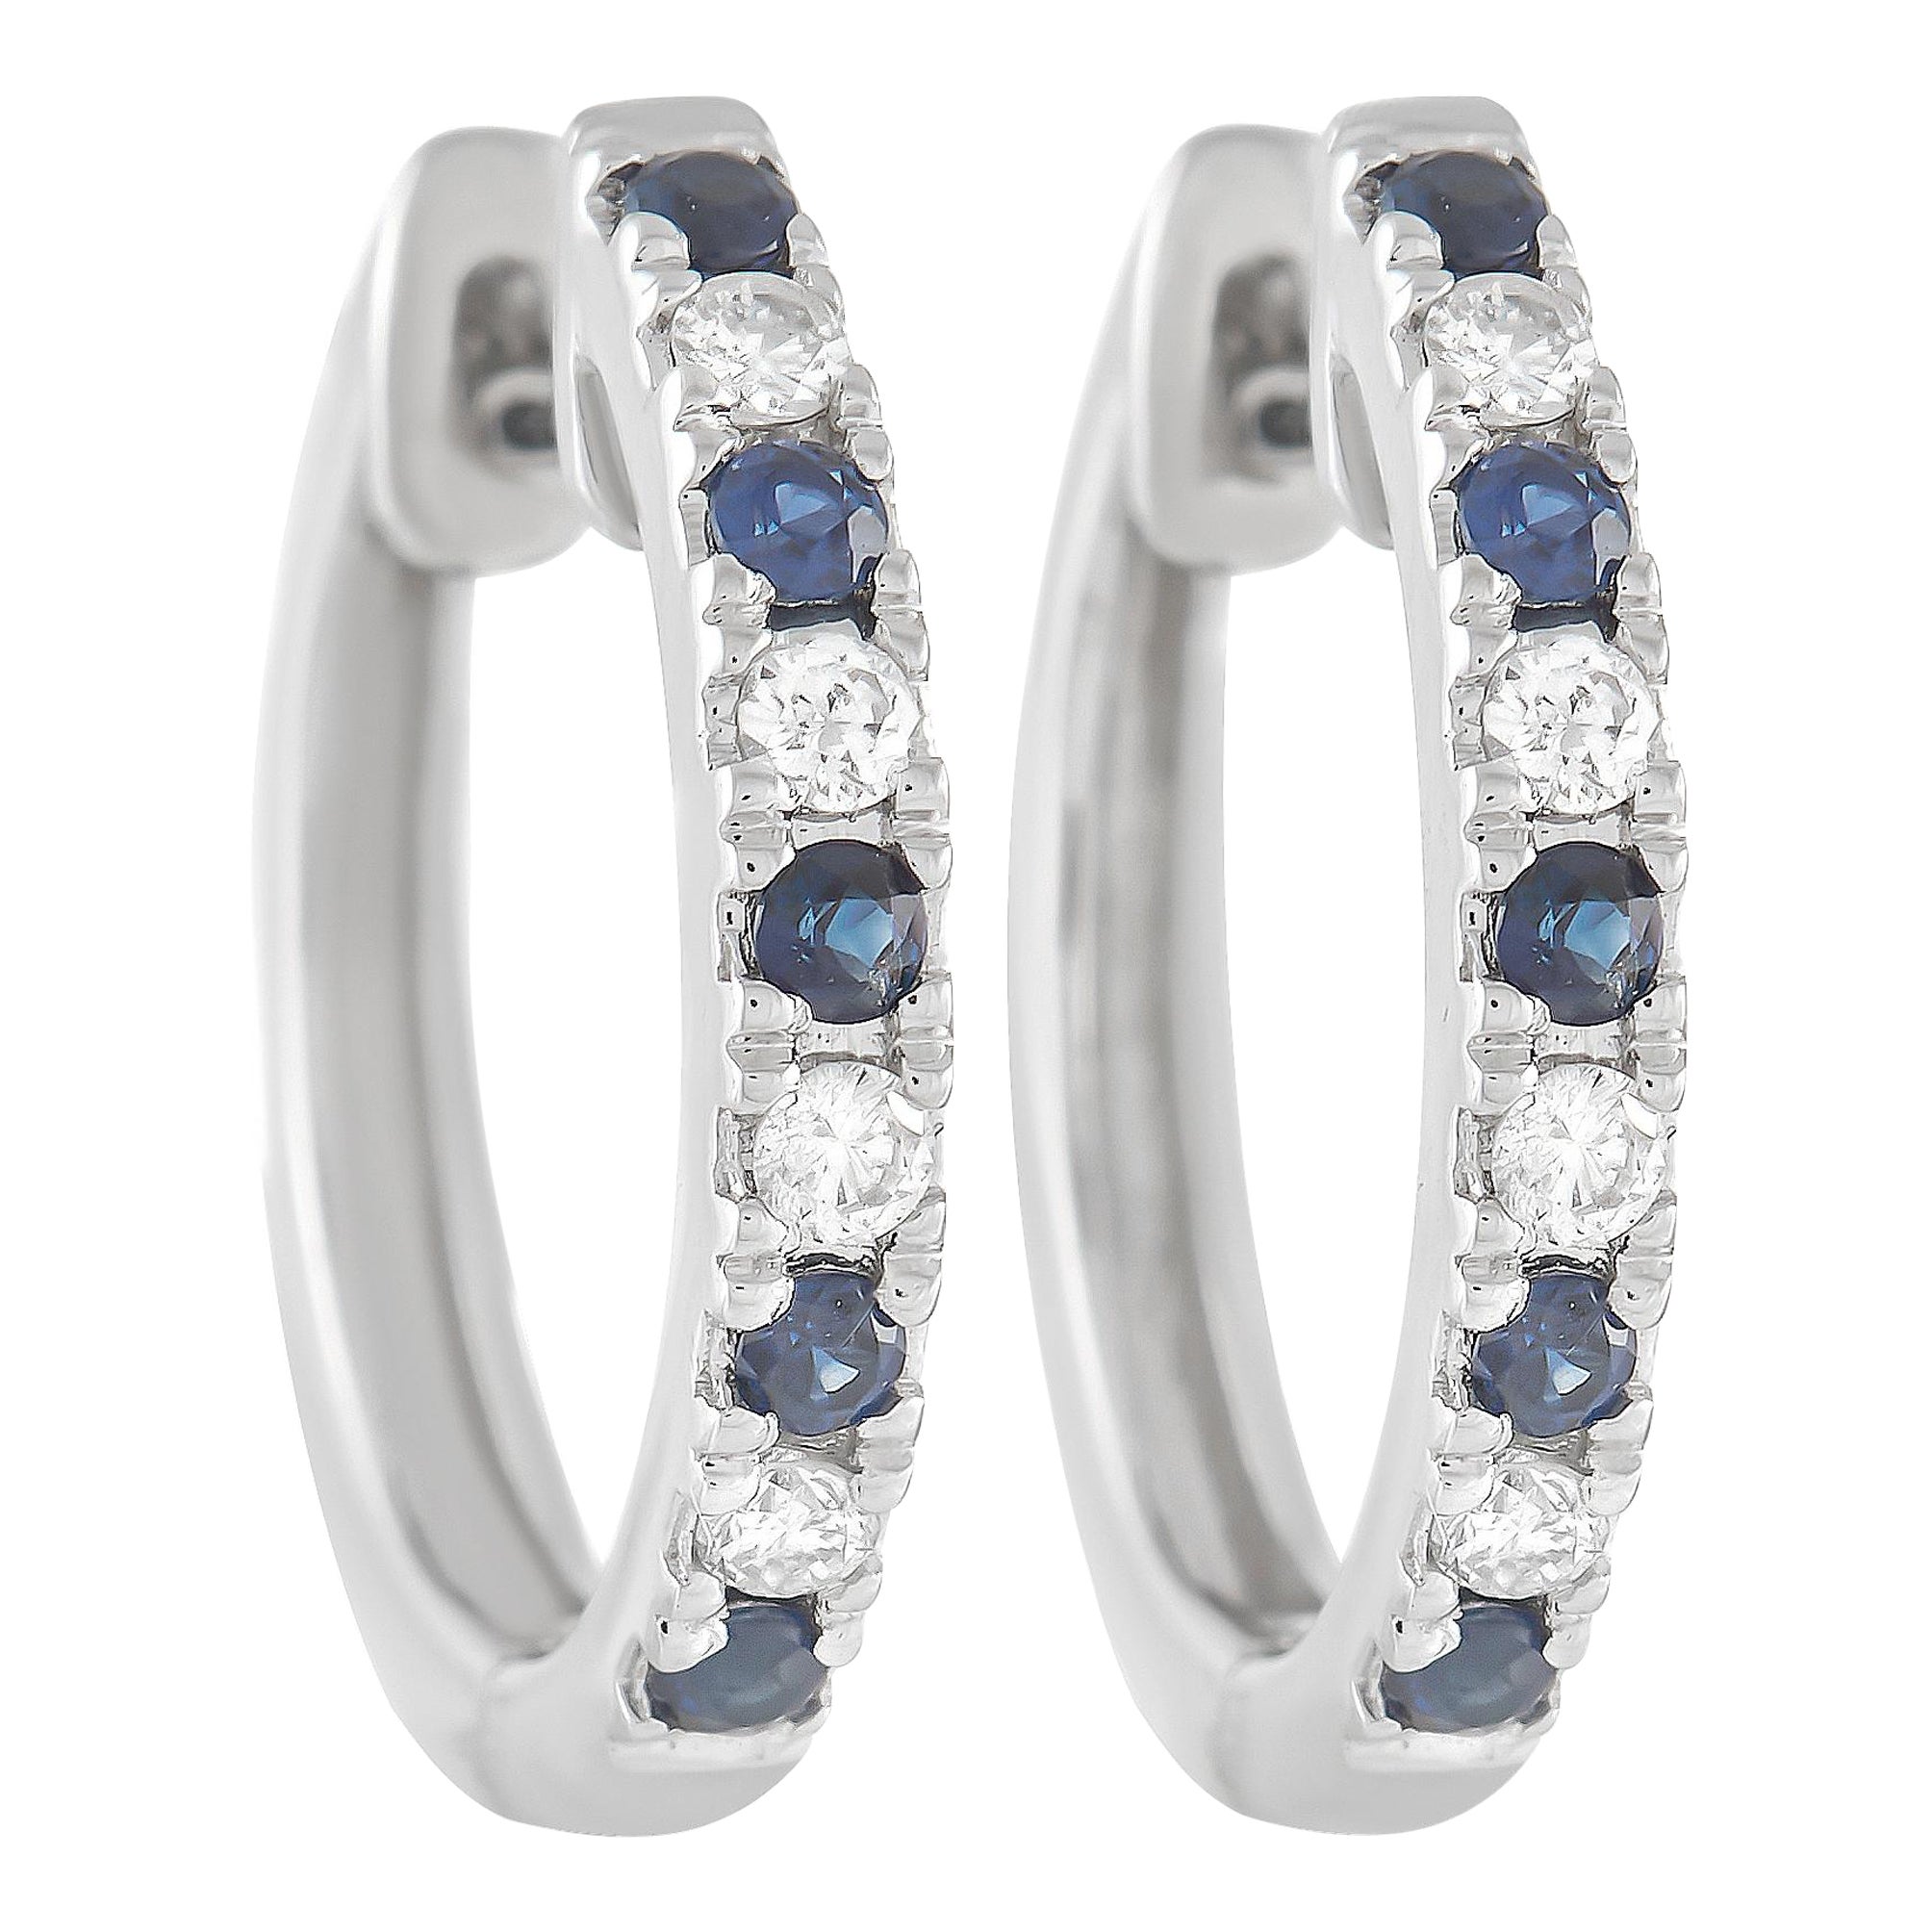 LB Exclusive 14K White Gold 0.11 Ct Diamond and Sapphire Hoop Earrings For Sale